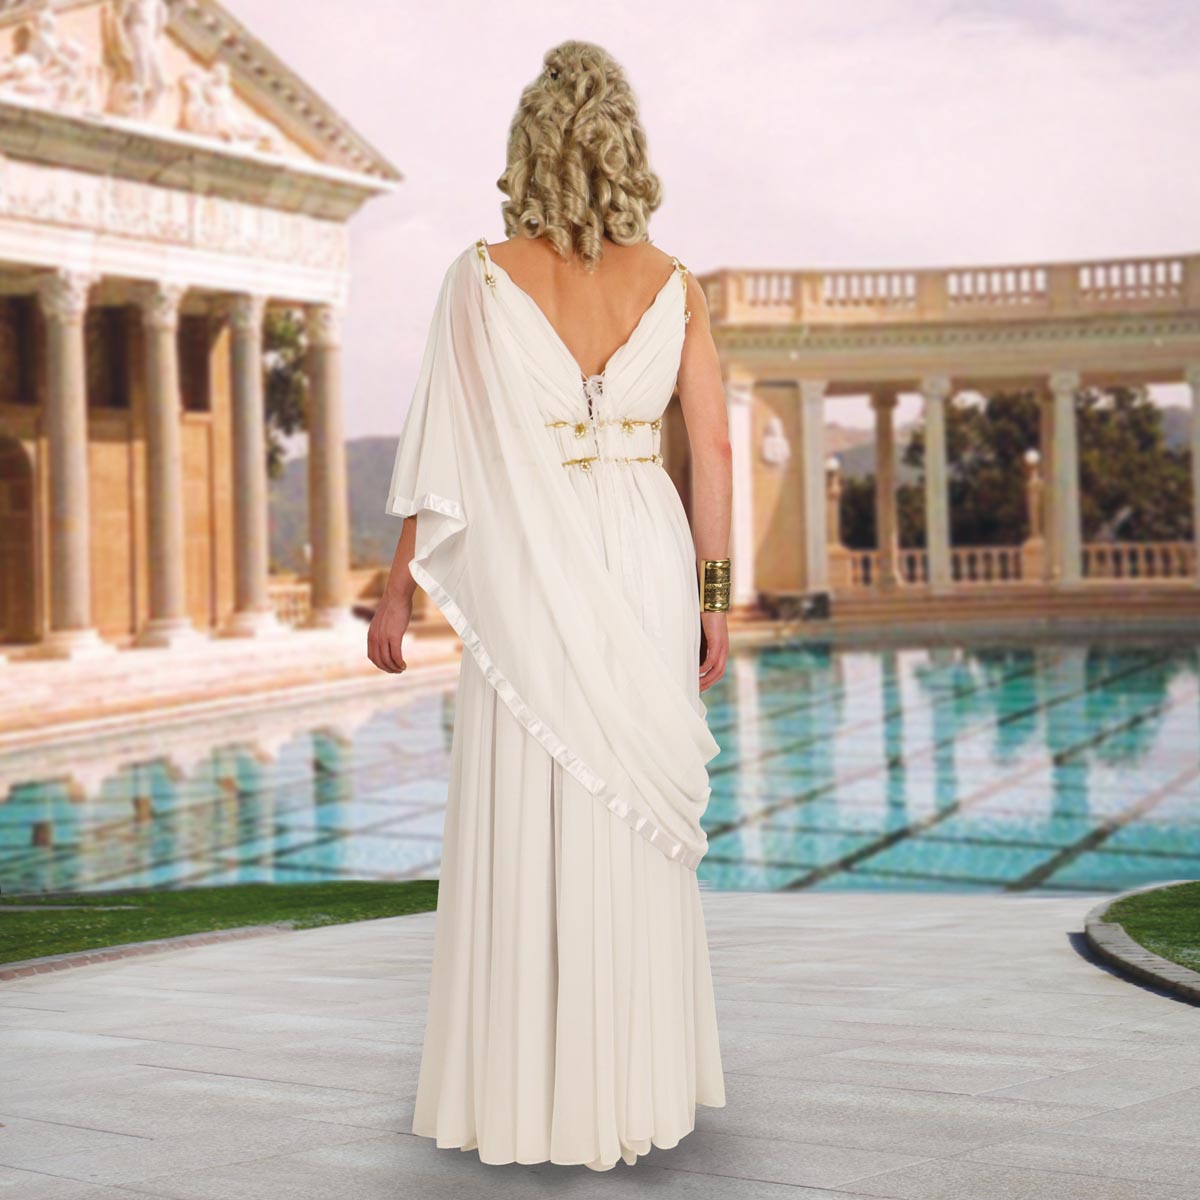 Helen of Troy Gown, Size S